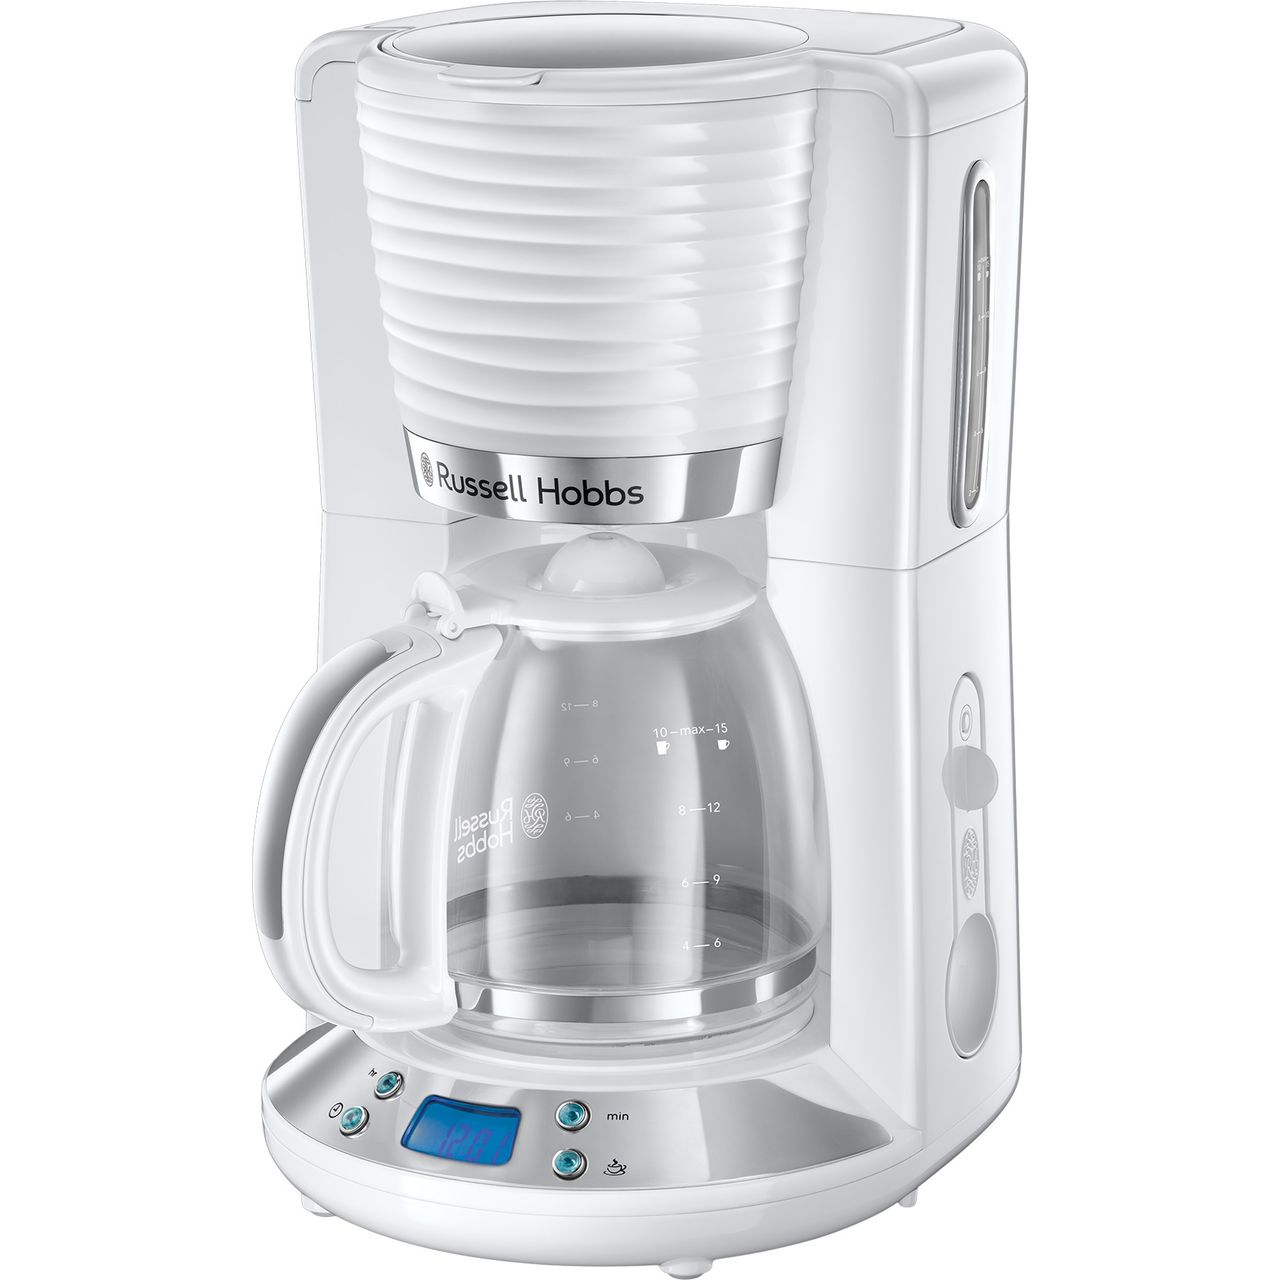 Russell Hobbs Inspire 24390 Filter Coffee Machine Review